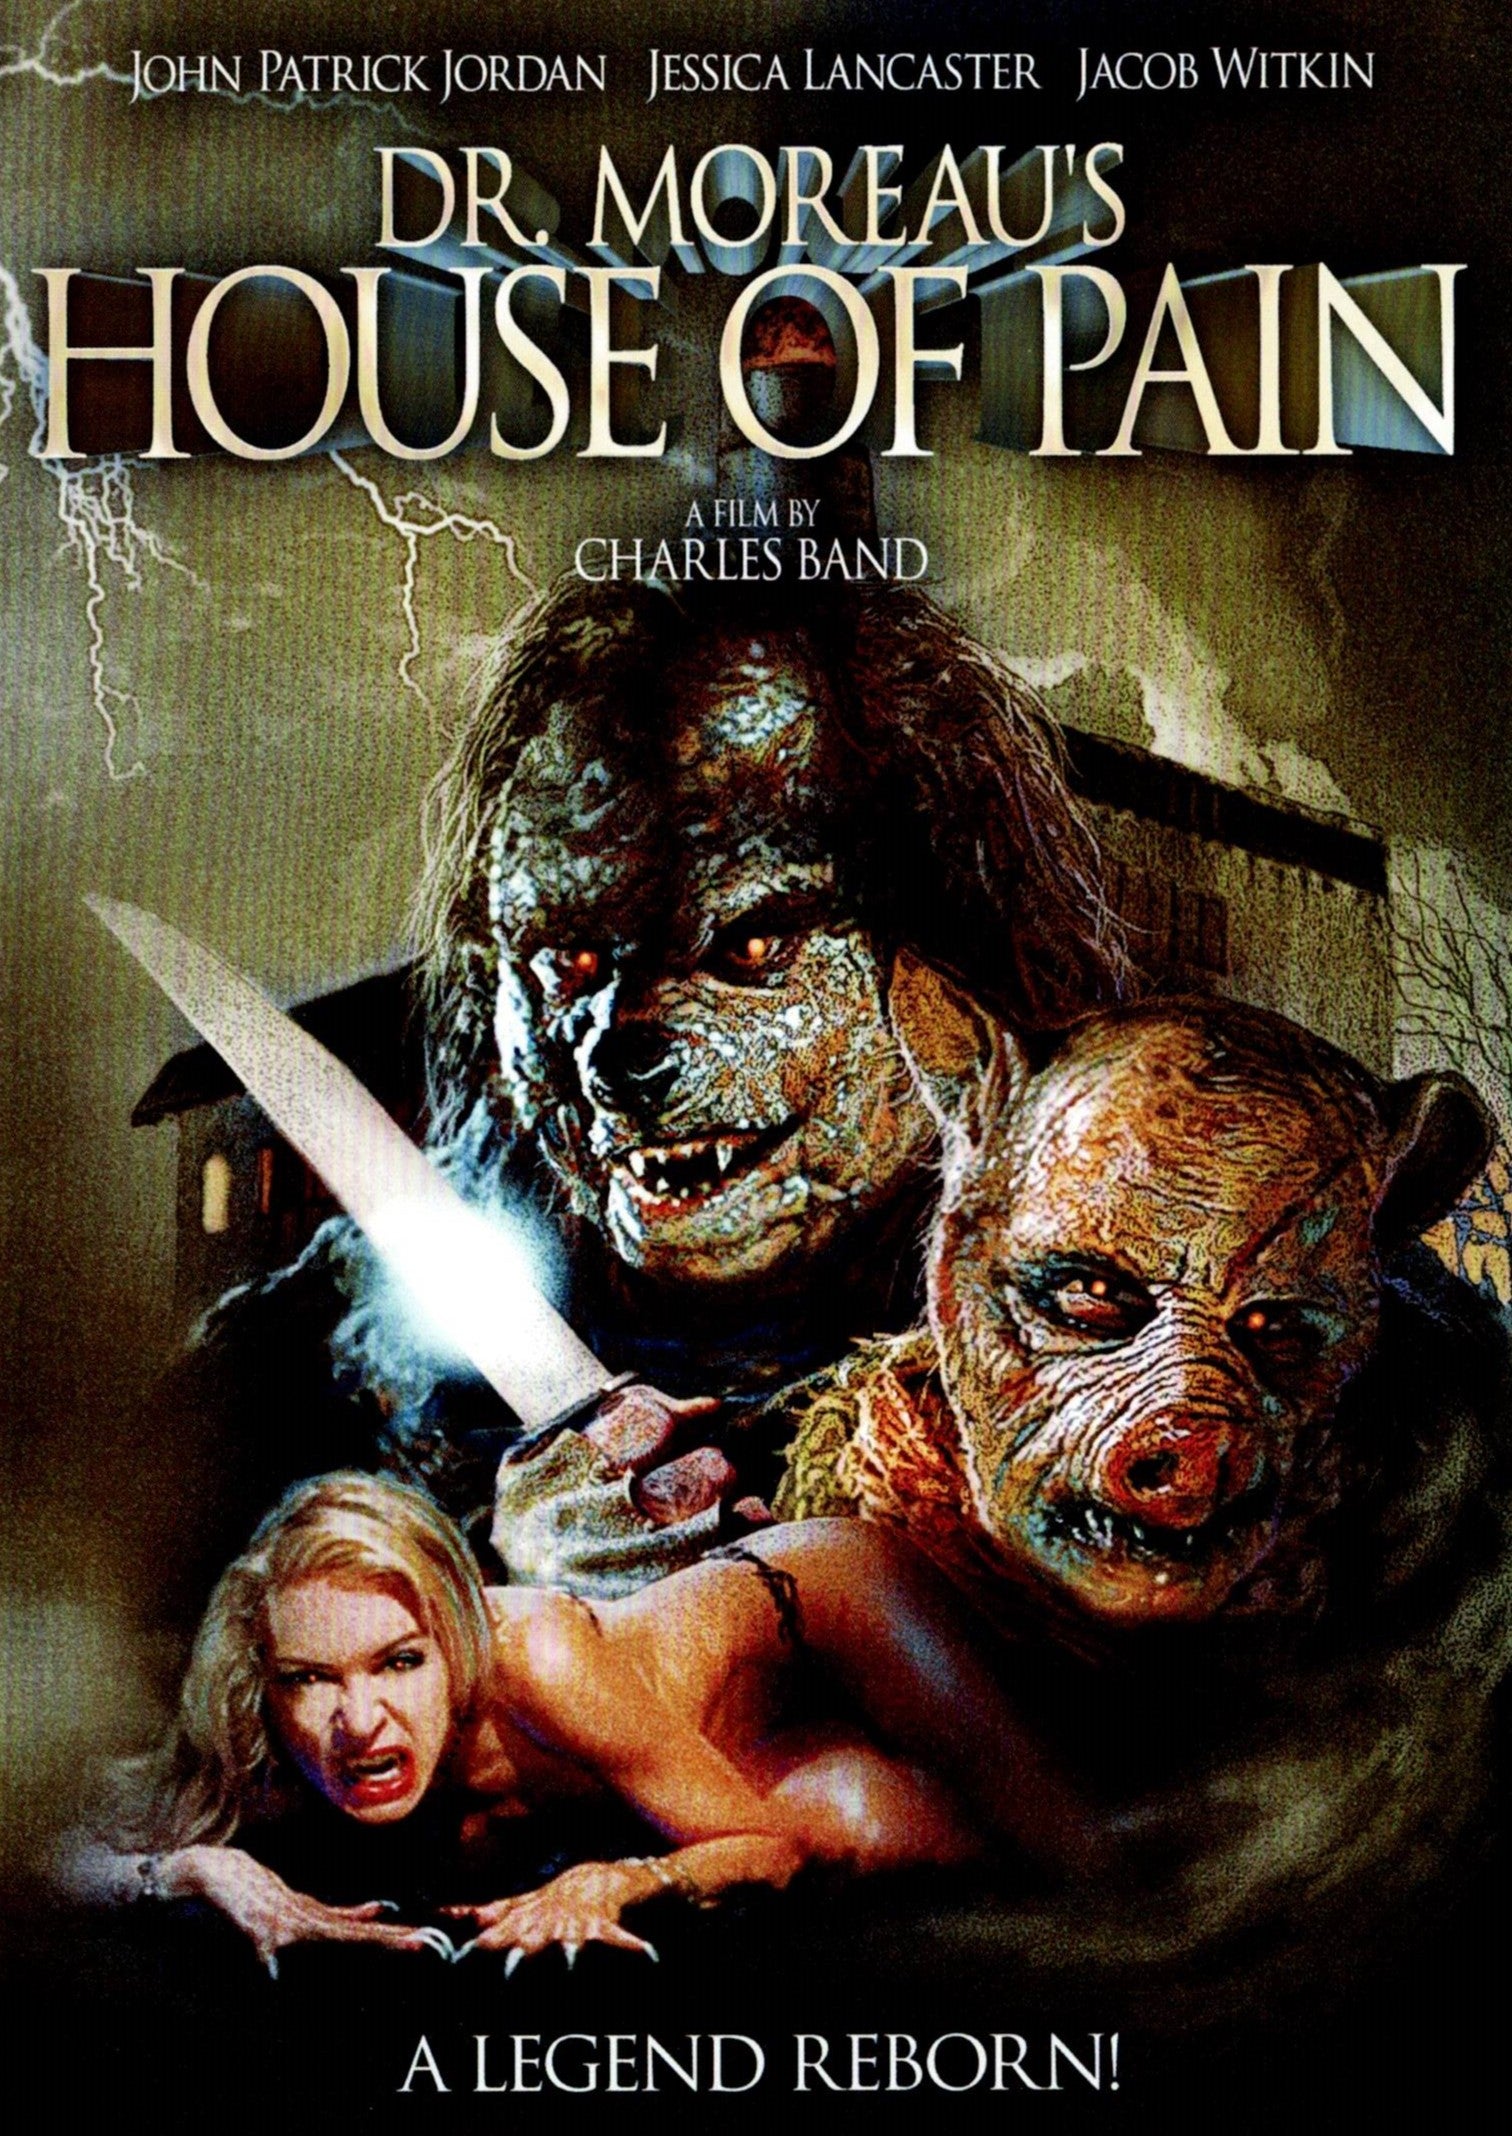 DR MOREAU'S HOUSE OF PAIN DVD